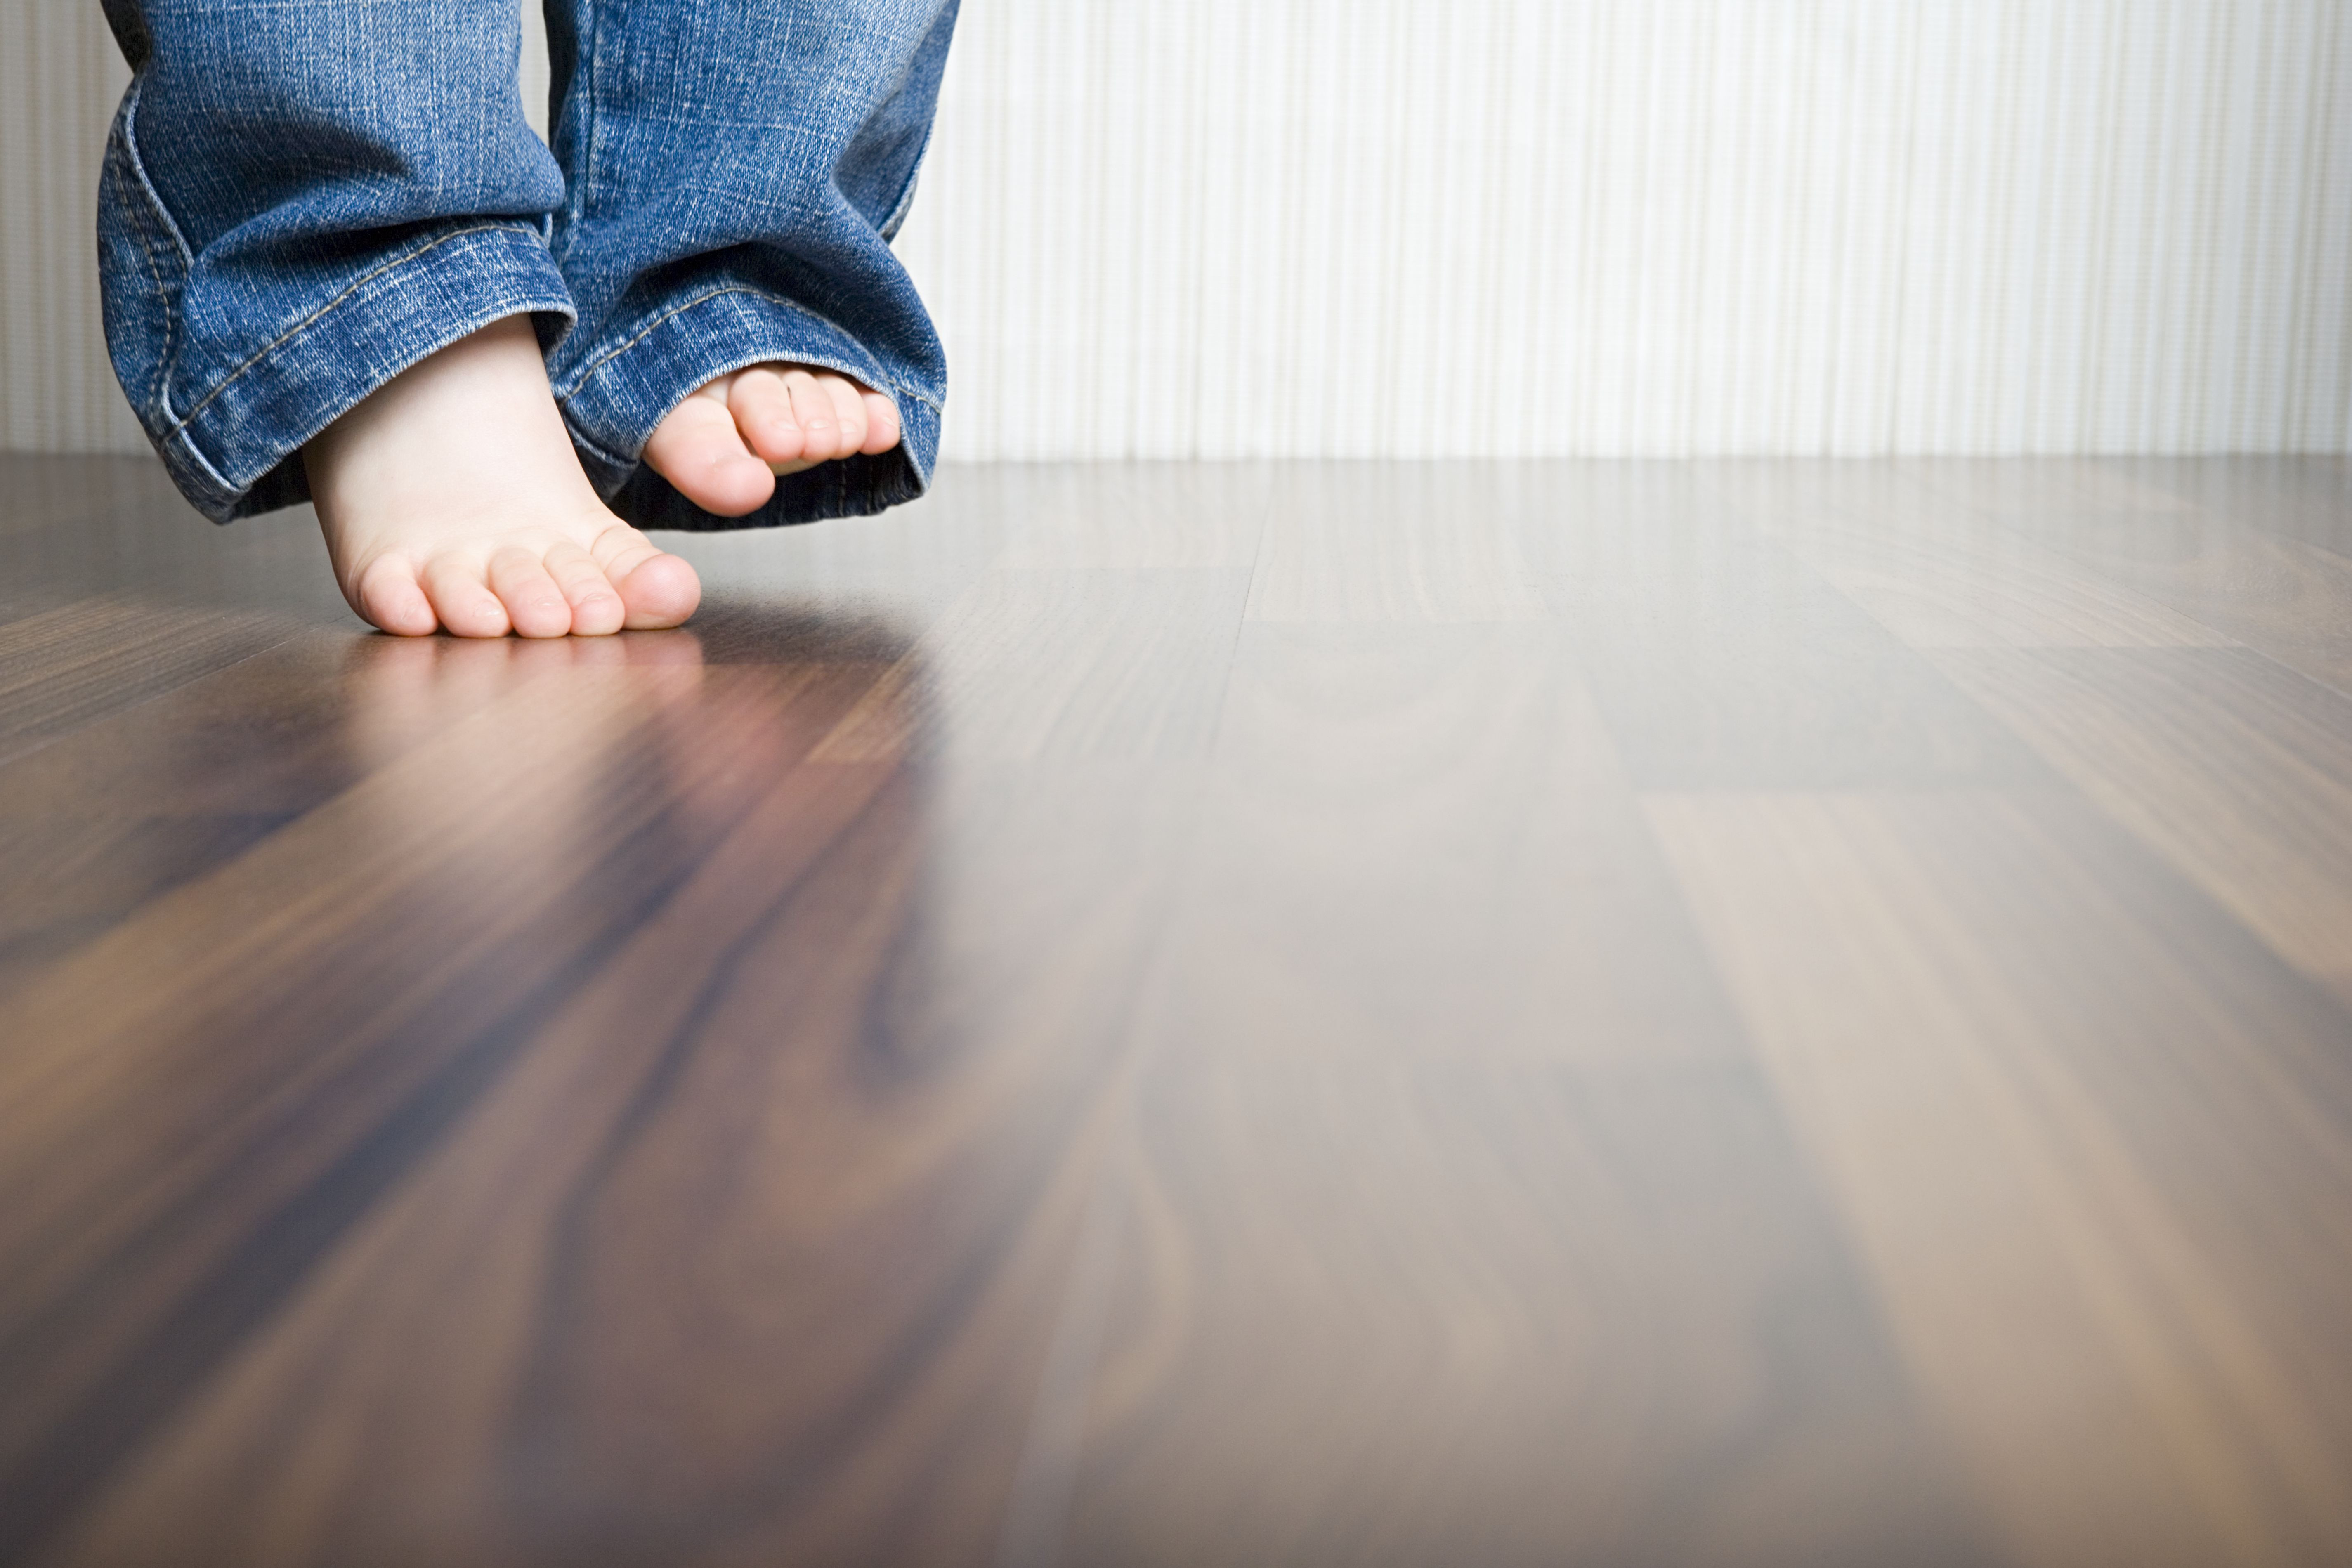 hardwood floor care guide of how to clean hardwood floors best way to clean wood flooring within 1512149908 gettyimages 75403973